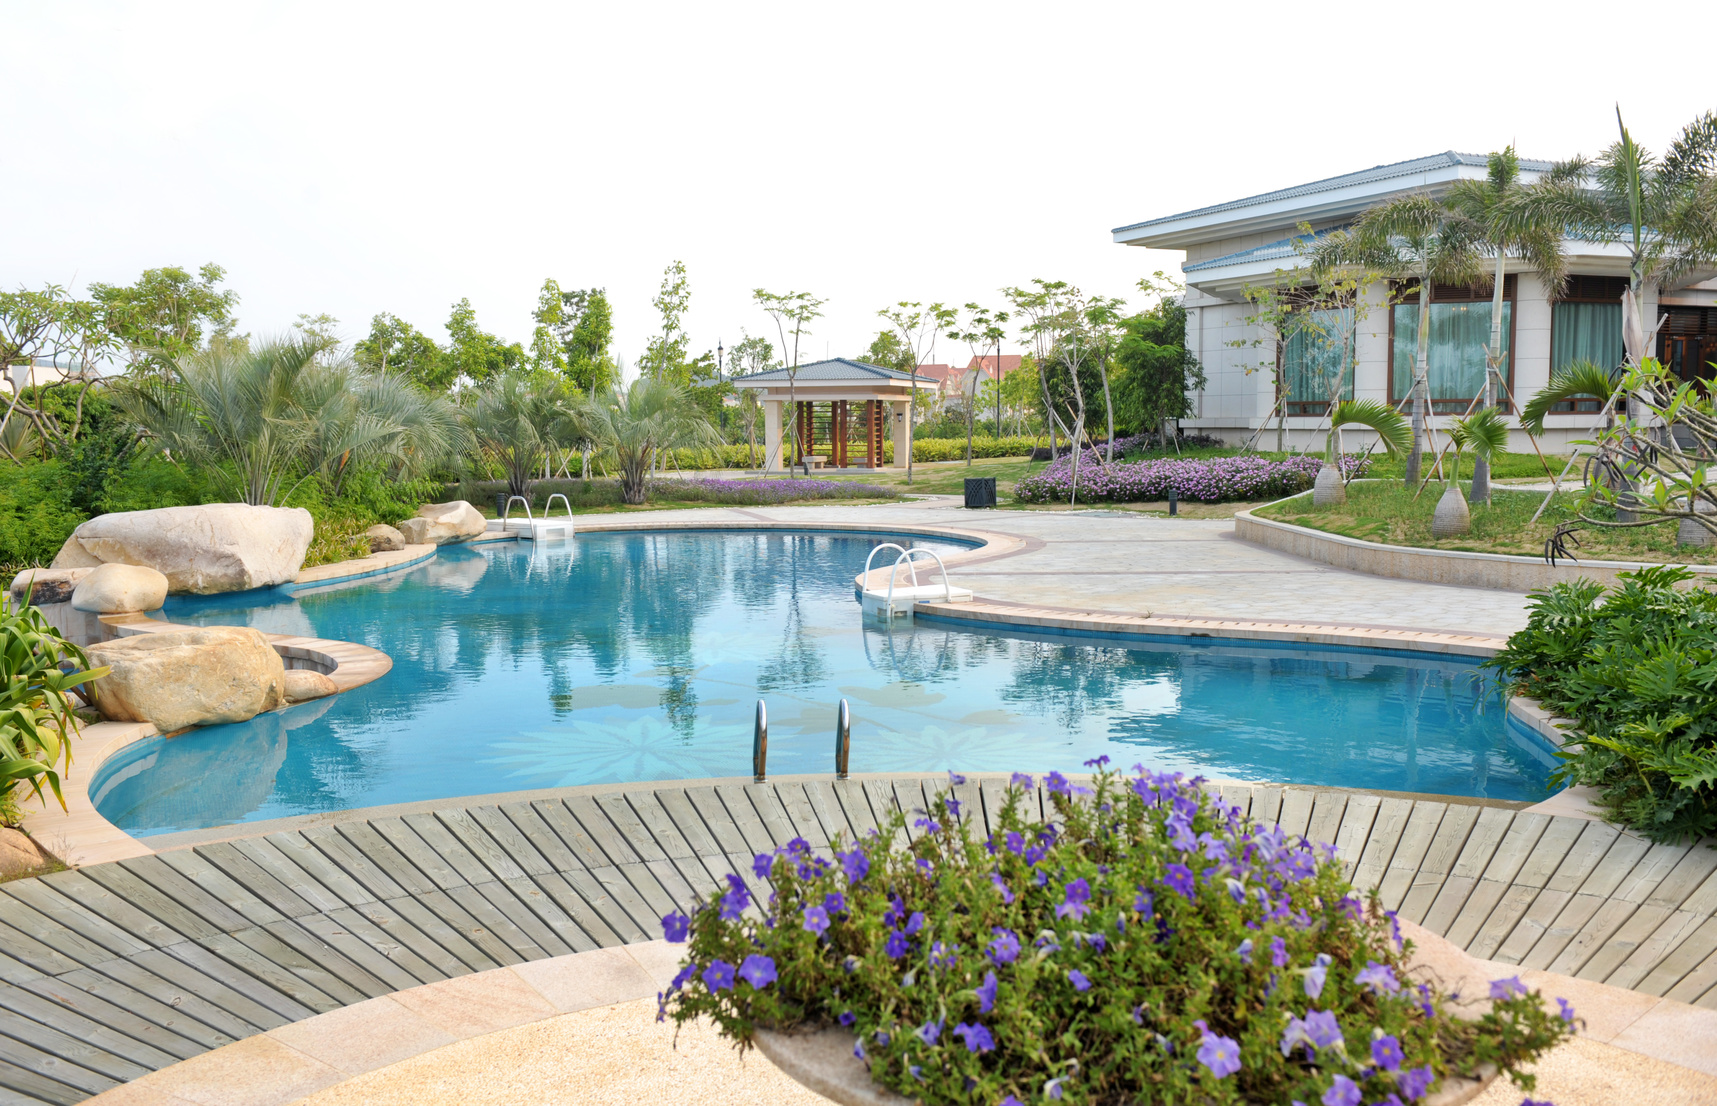 3 Ways a Pool May Affect Your Home Insurance